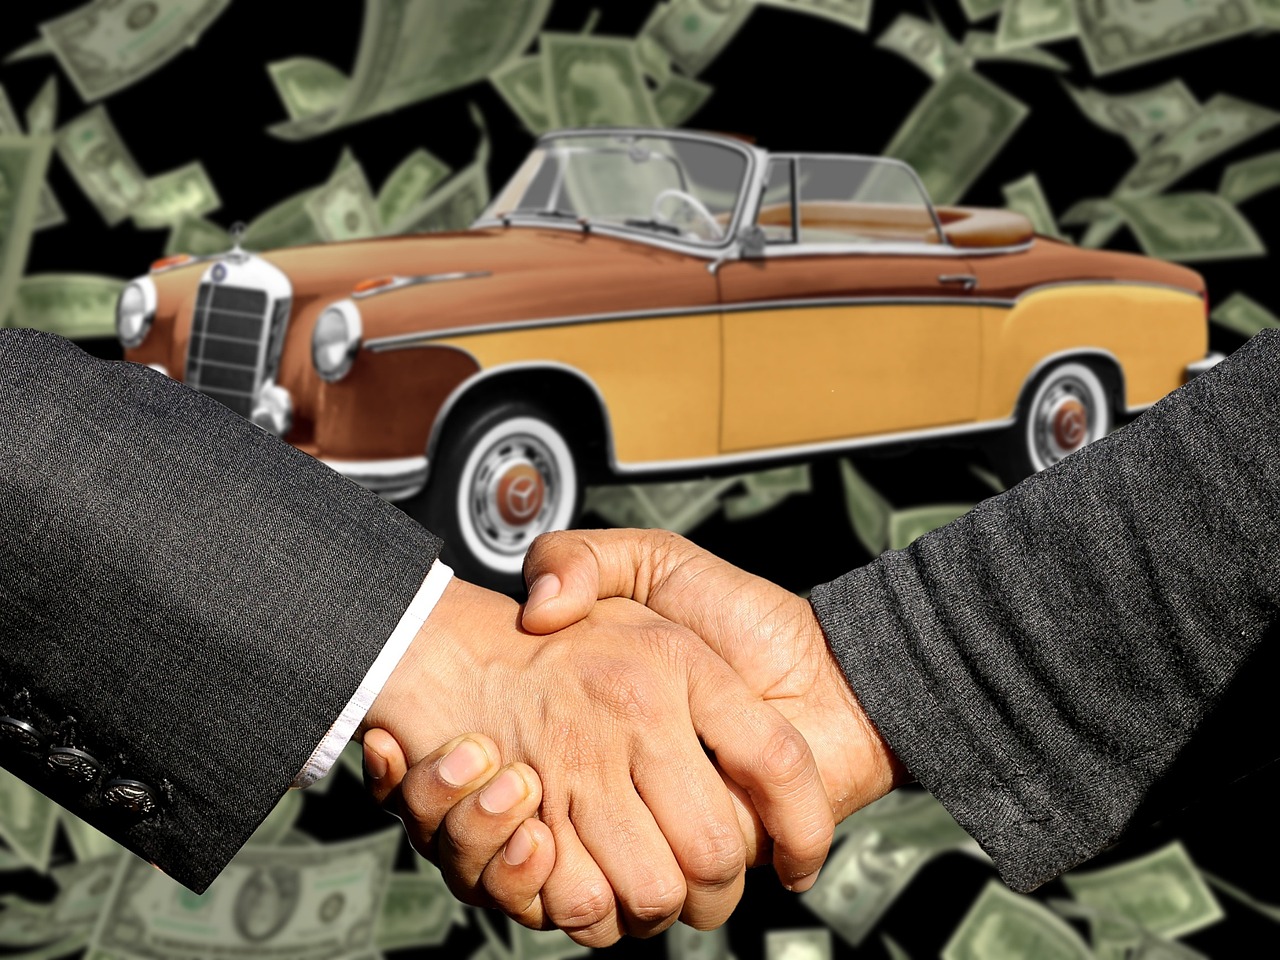 Selling Your Vehicle For Cash: What To Do And What To Avoid